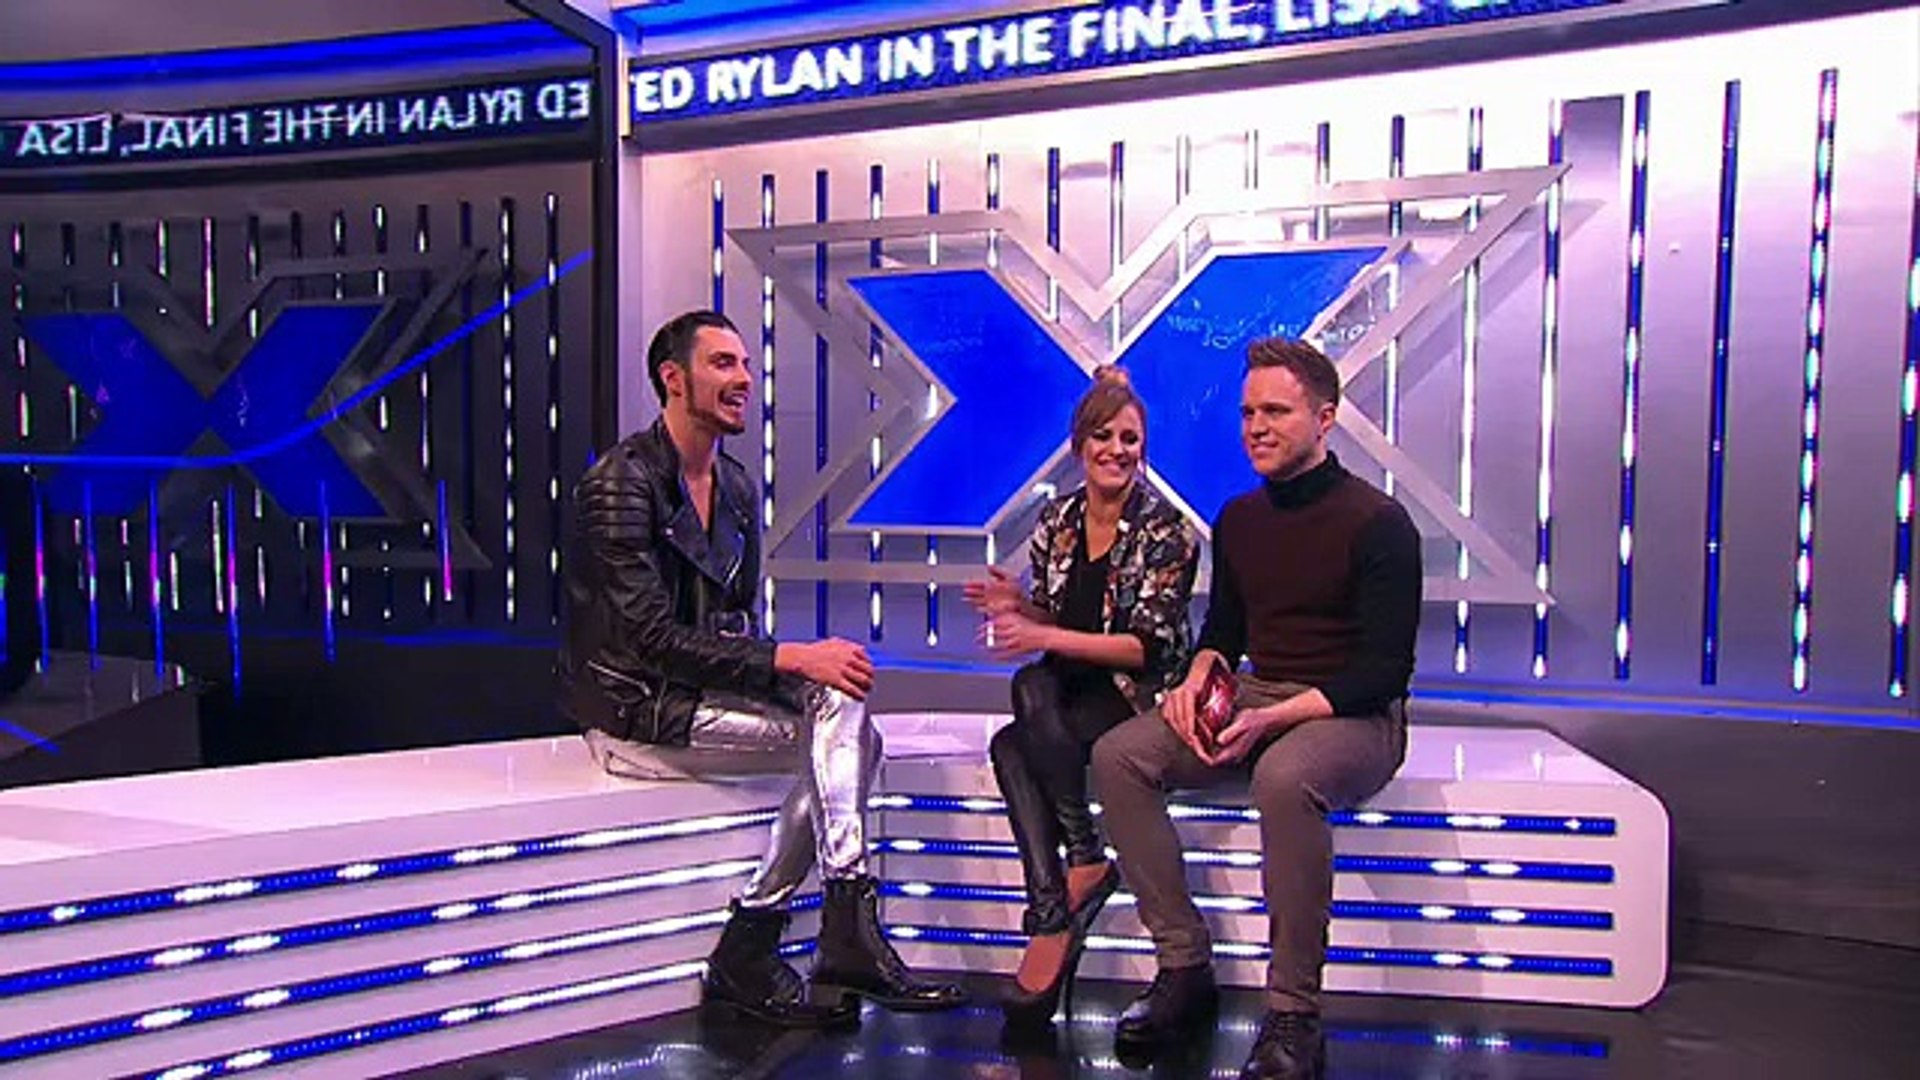 ⁣Rylan's e-X-it interview! - The Xtra Factor - The X Factor UK 2012 - Official Channel